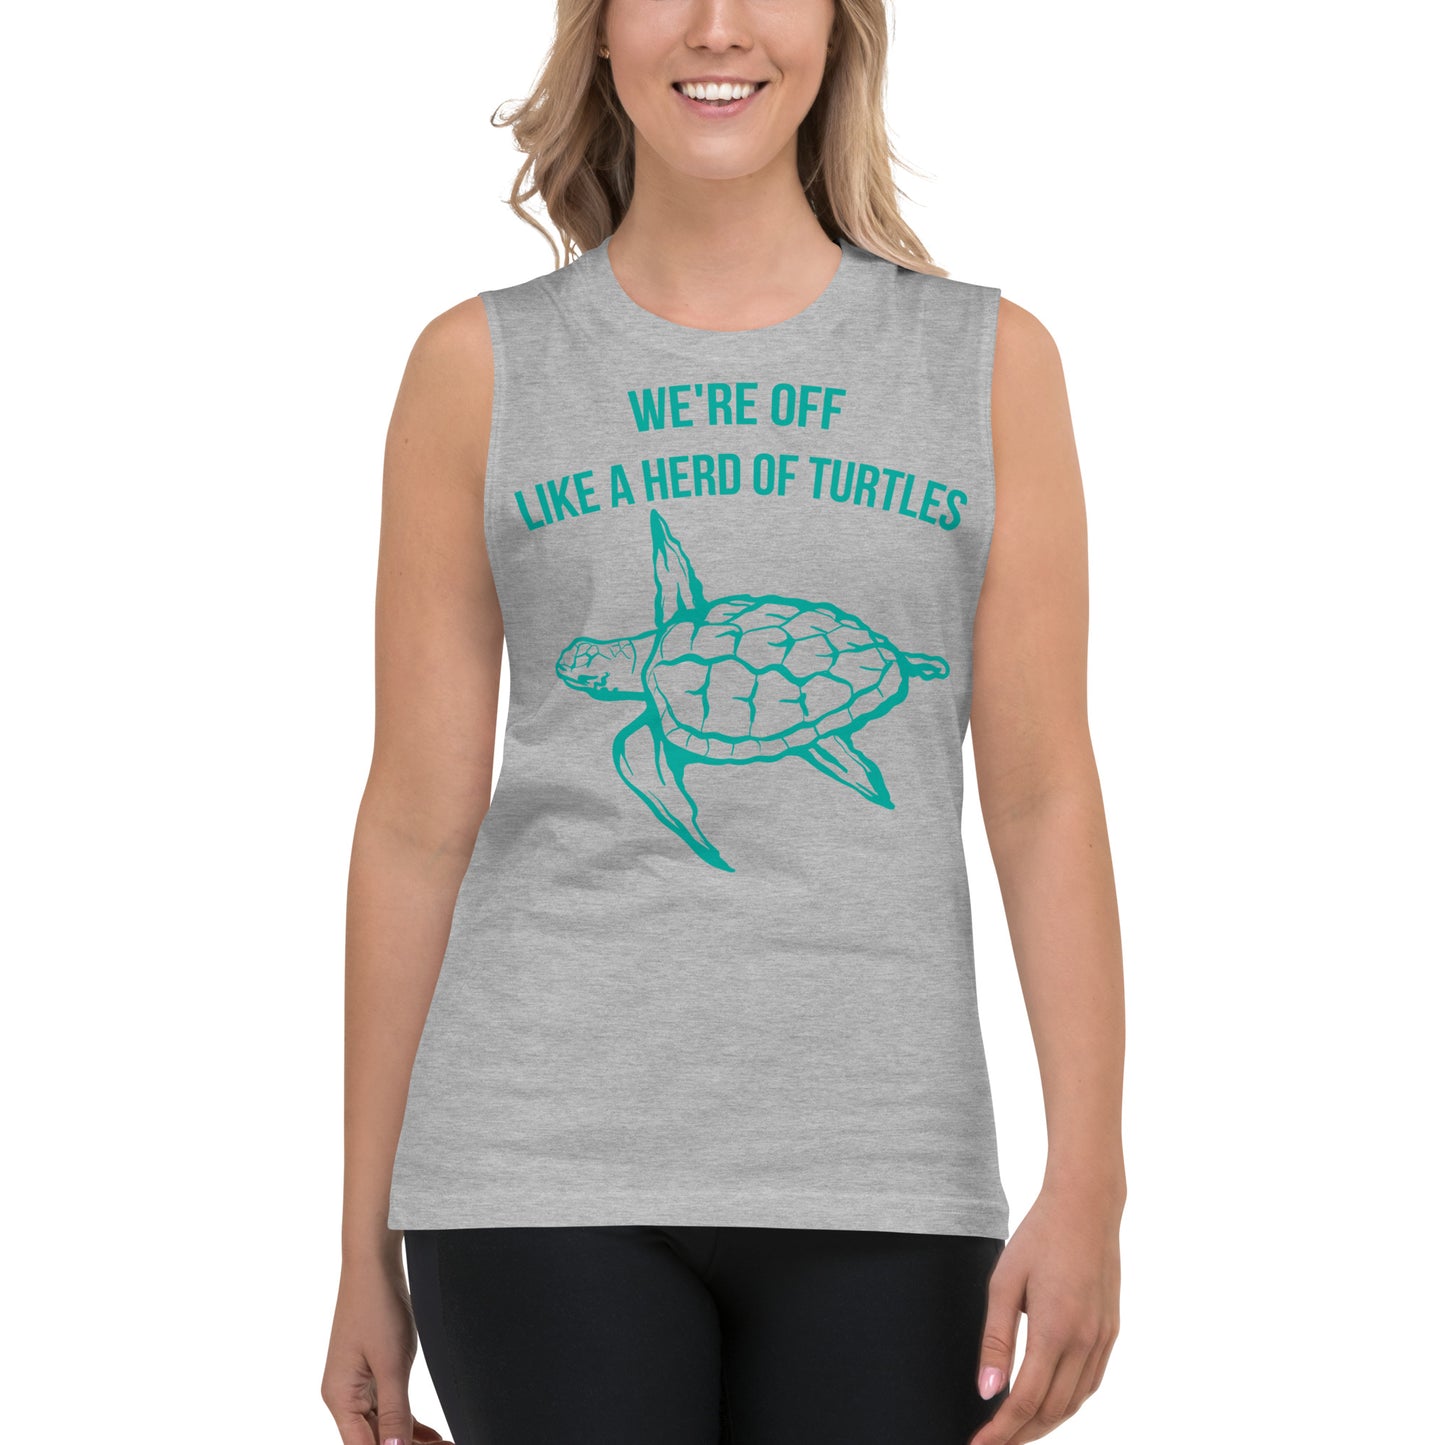 We're off Like a Herd of Turtles / Unisex Muscle Shirt